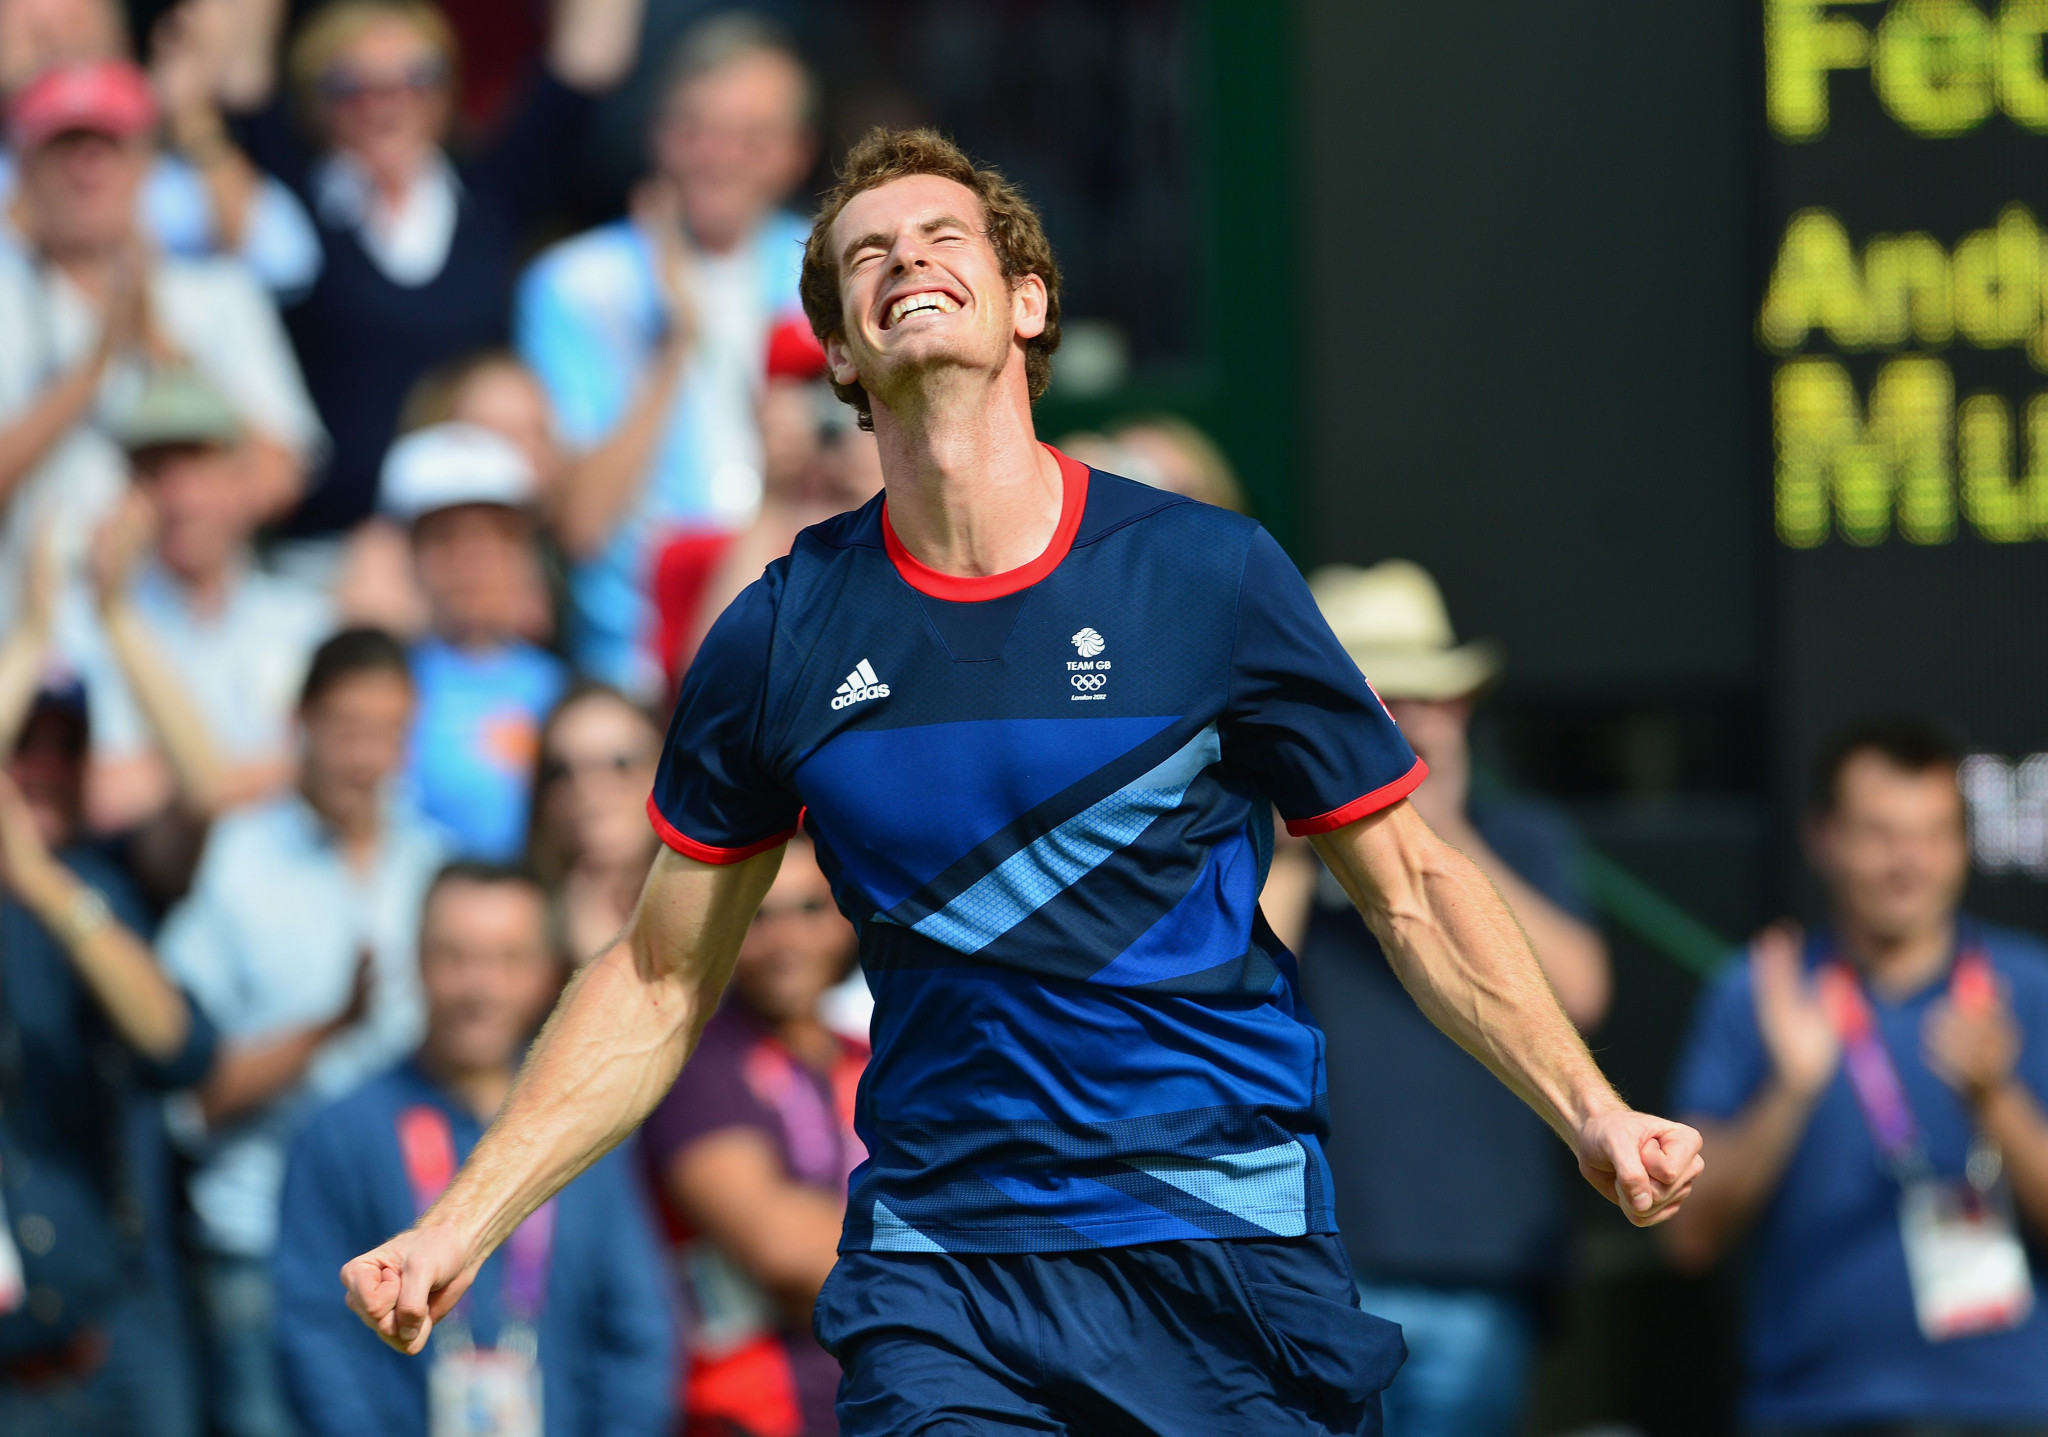 Andy Murray's Olympic gold in London ended the wait for a major title that many thought might never come ©Getty Images